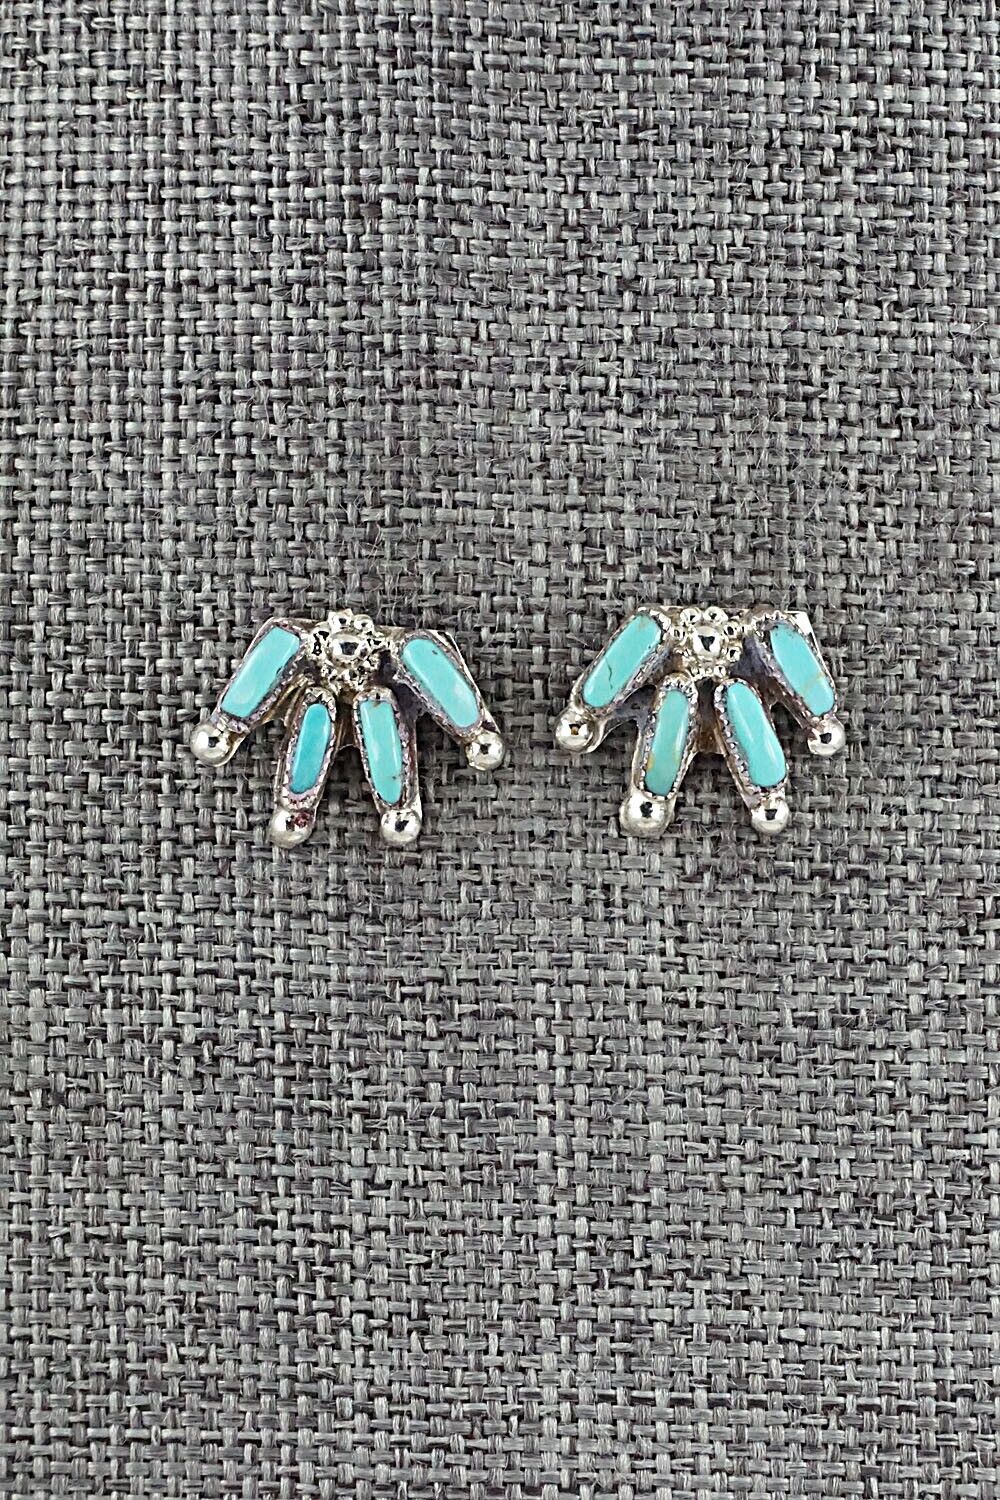 Turquoise & Sterling Silver Necklace and Earrings Set - Veronica Yawakia